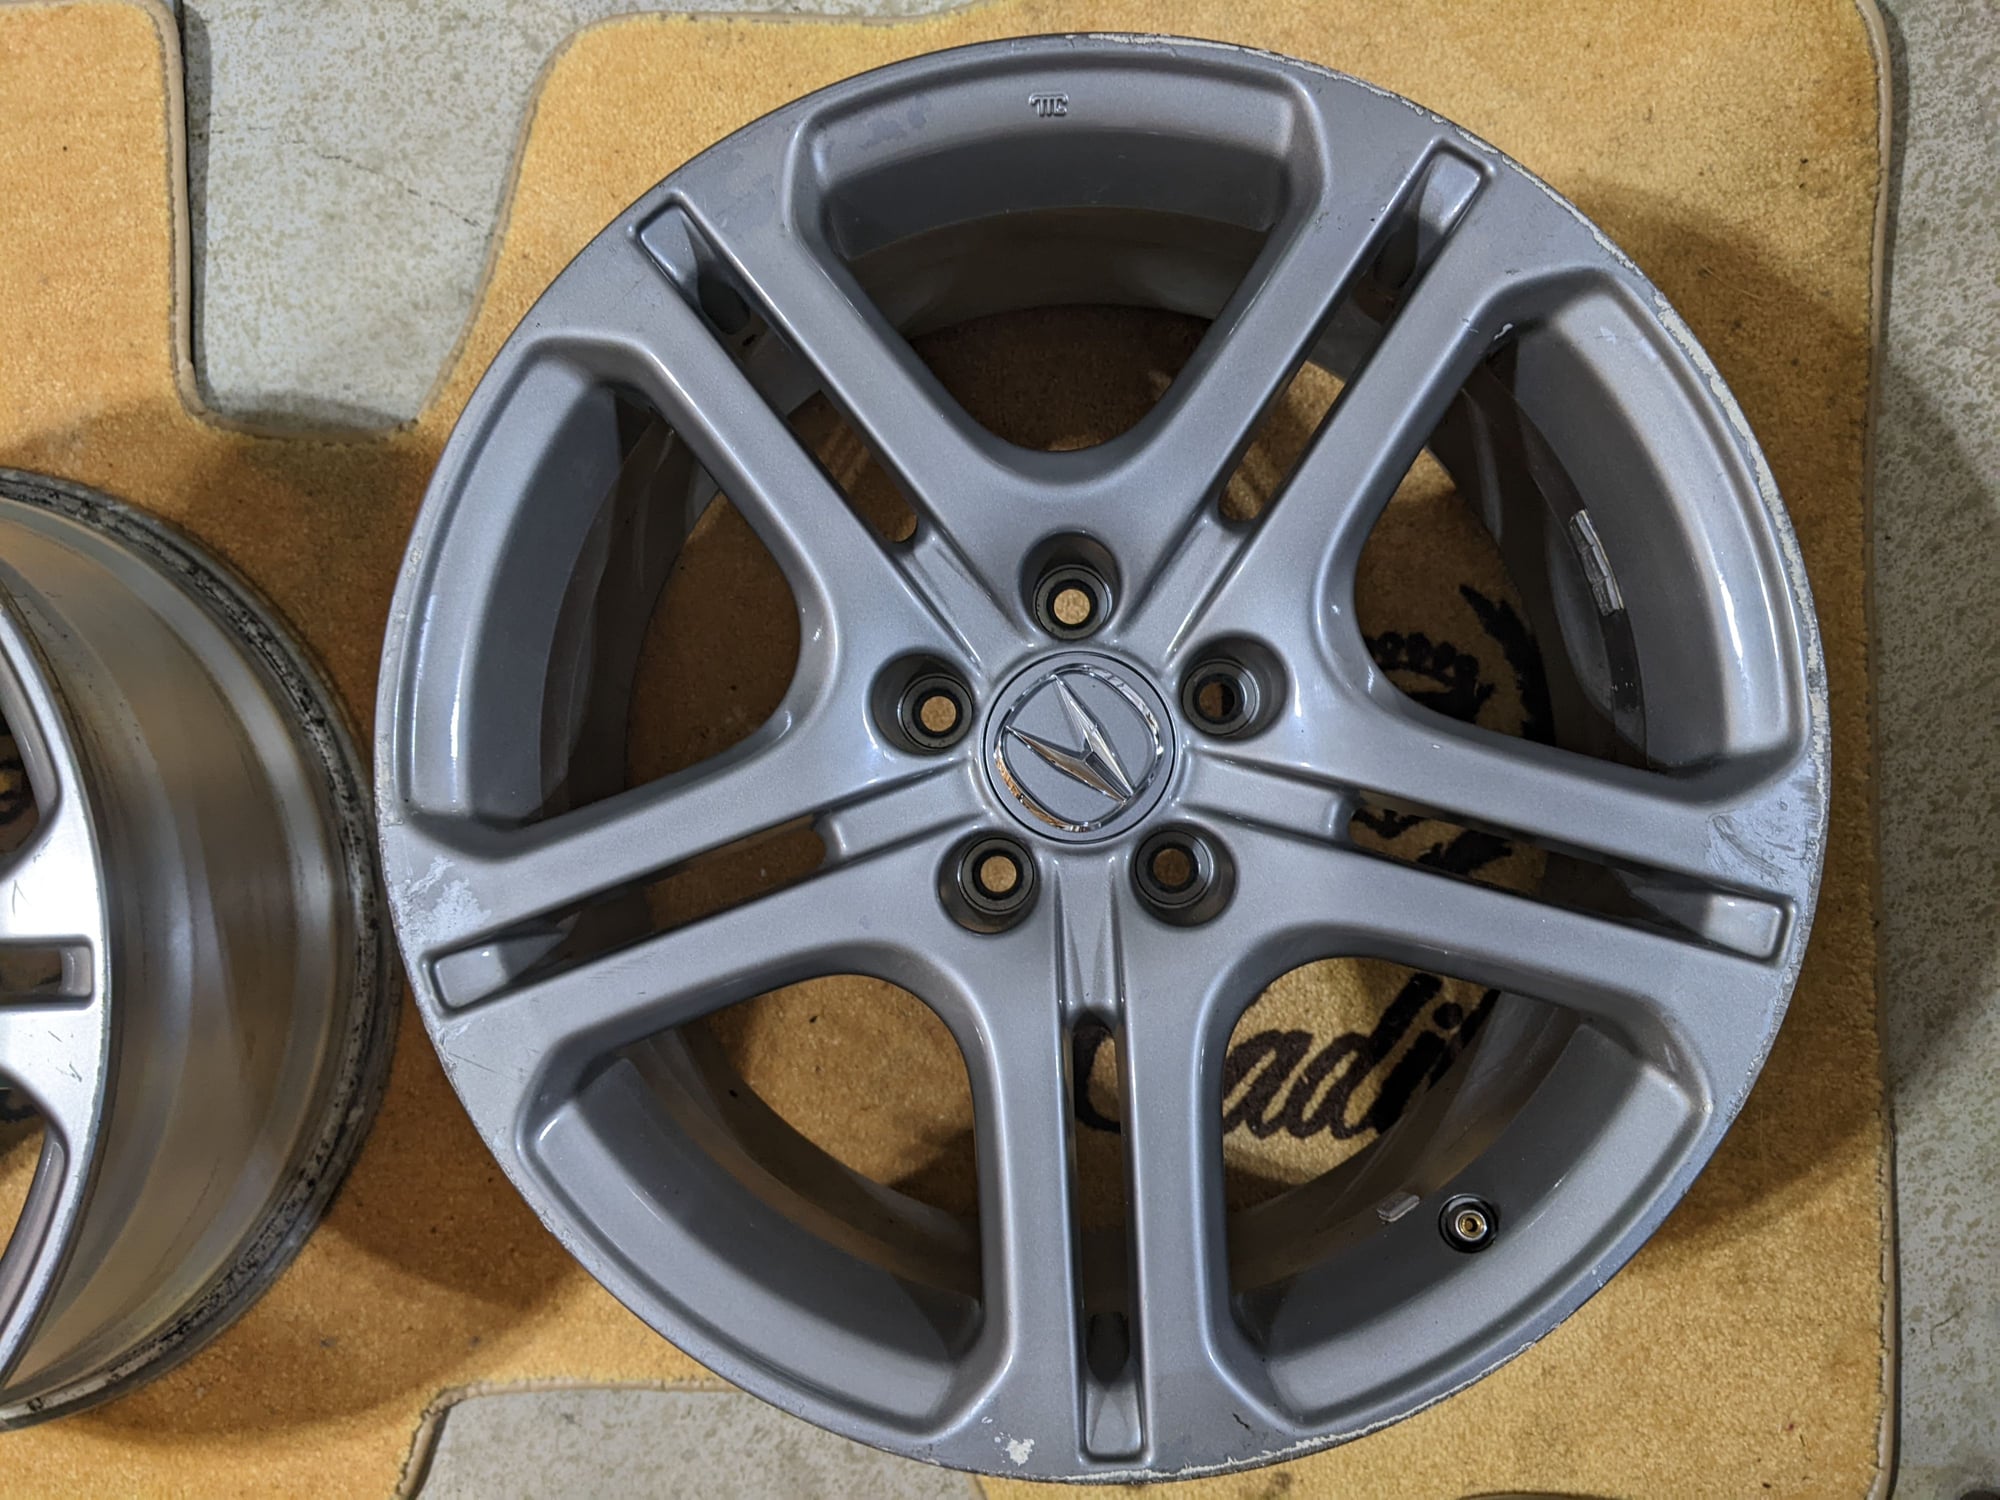 Wheels and Tires/Axles - FS: 3G TL OEM ASPEC wheels 18" x 8.5" - Used - 2004 to 2008 Acura TL - Plain City, OH 43064, United States